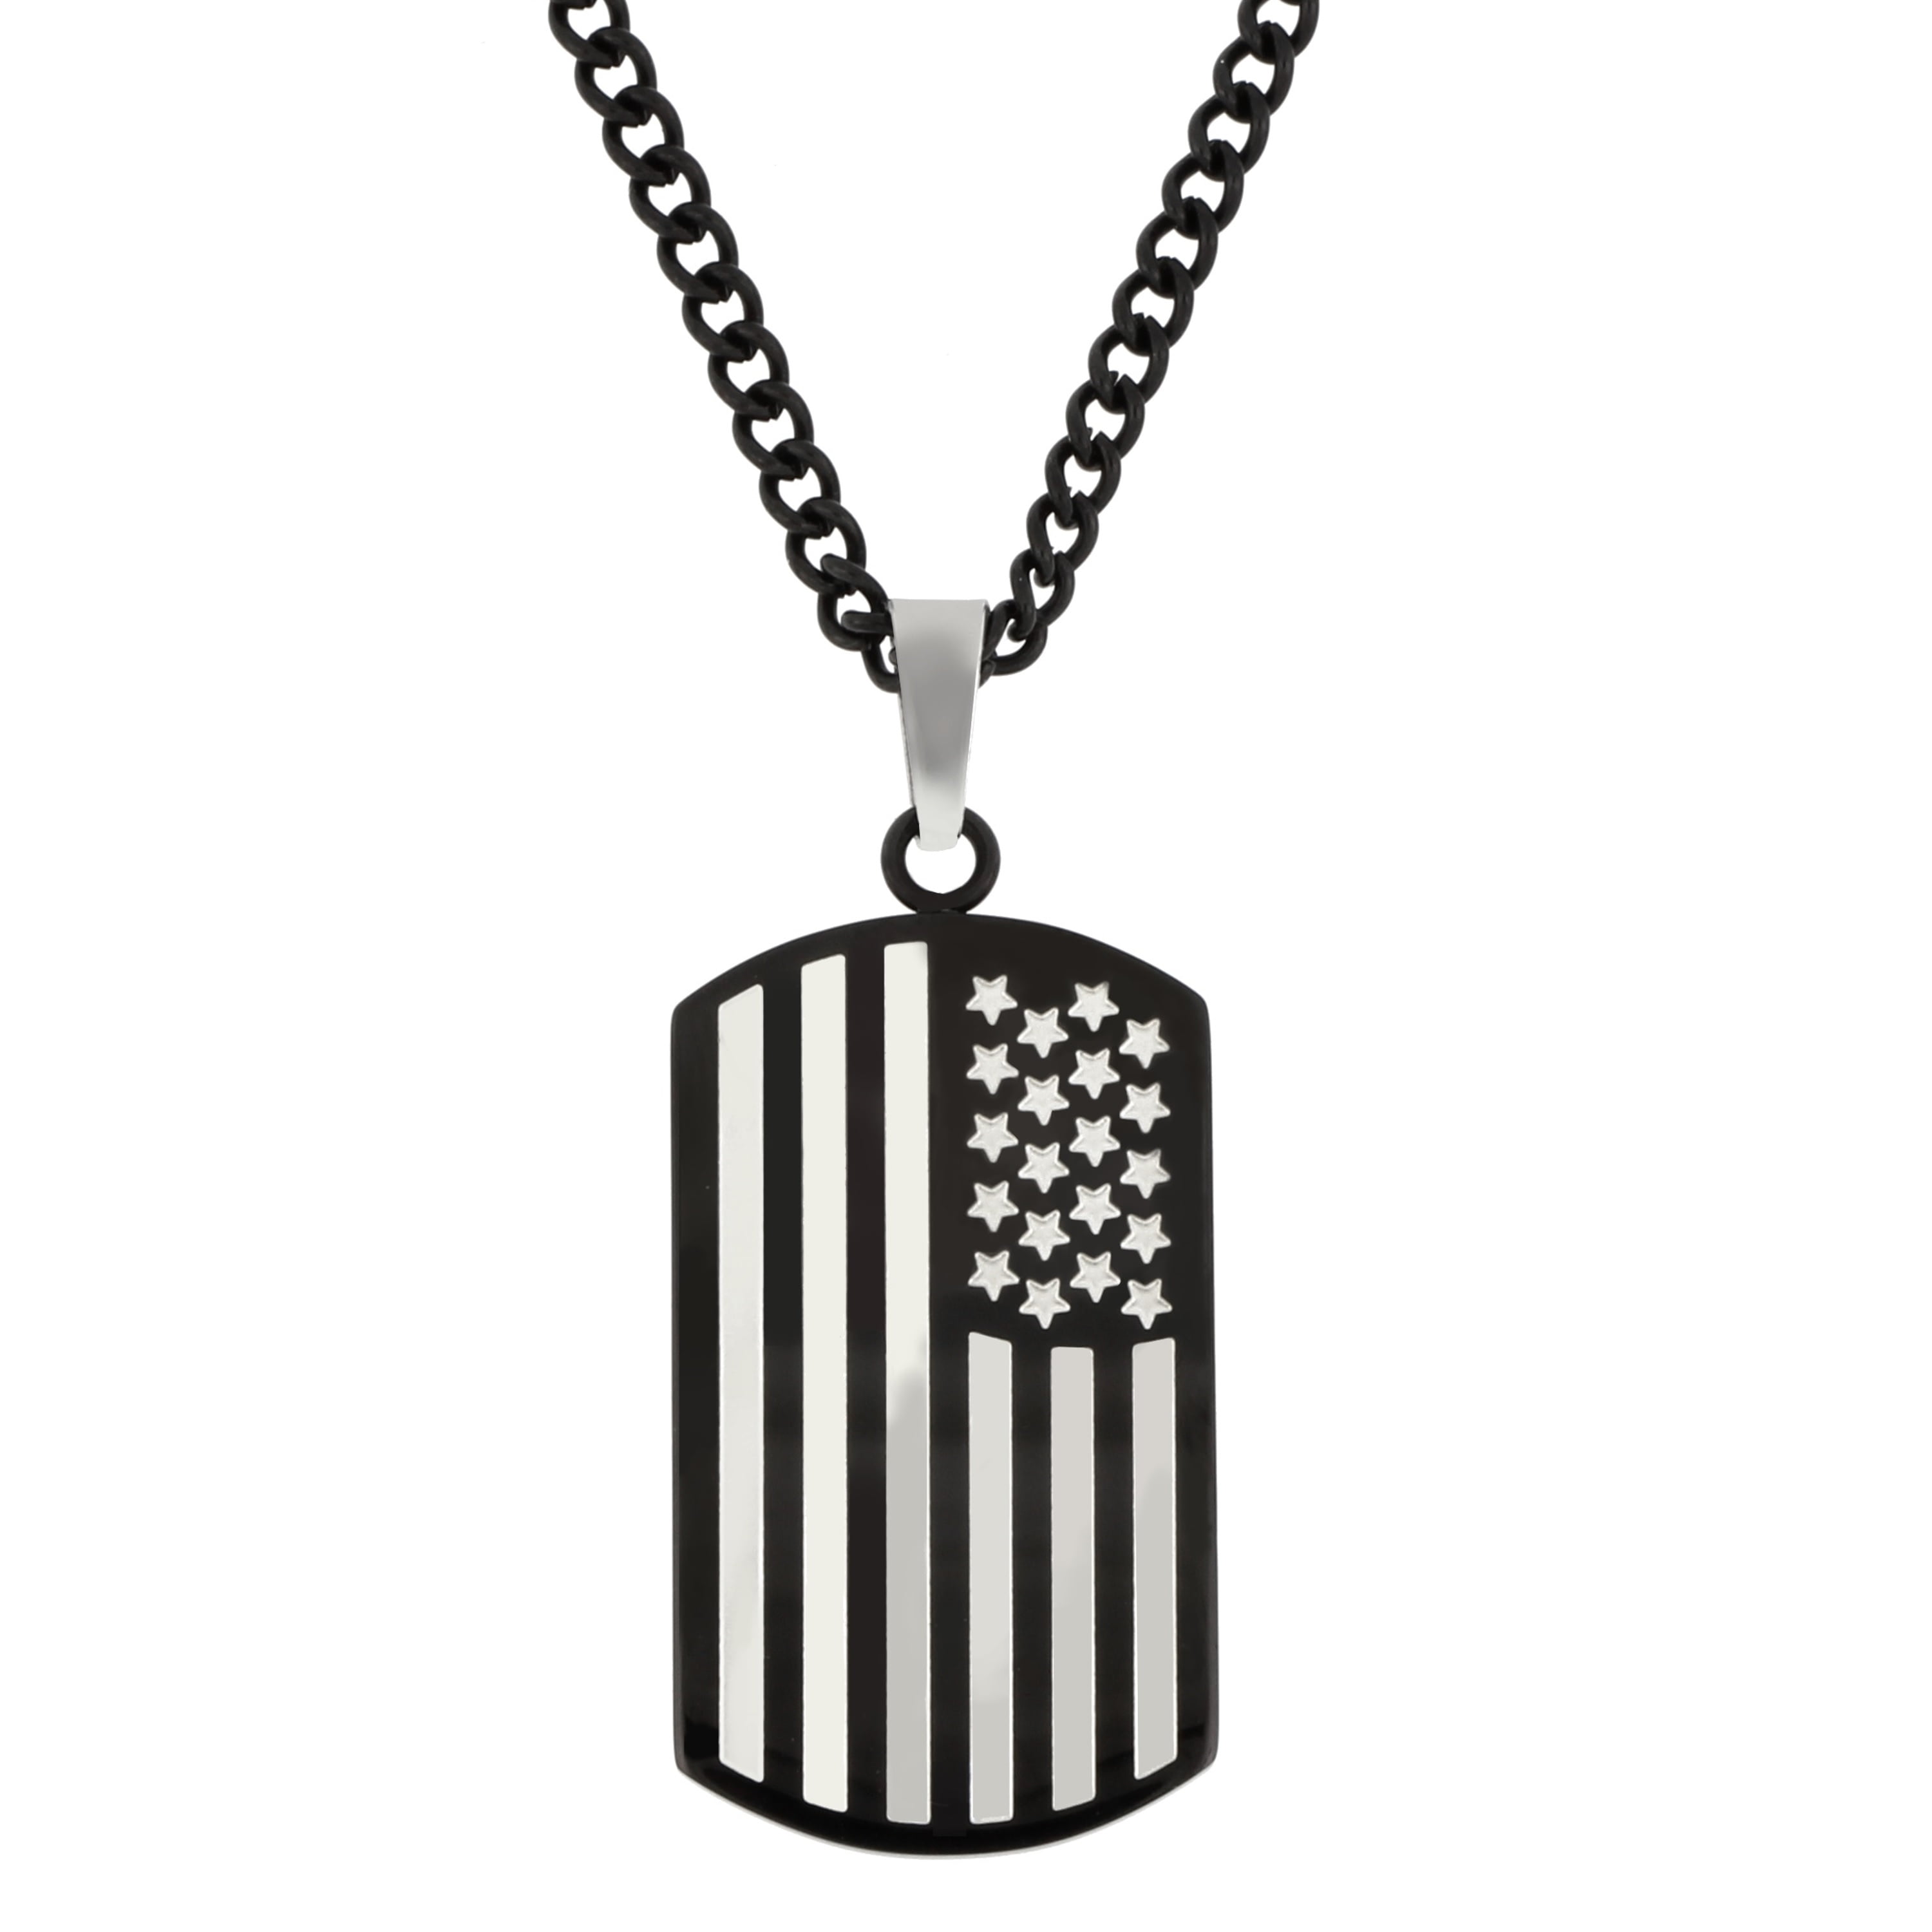 Details about   2pcs American USA Flag Patriotic Cross Dog Tag Stainless Steel Pendant Necklace